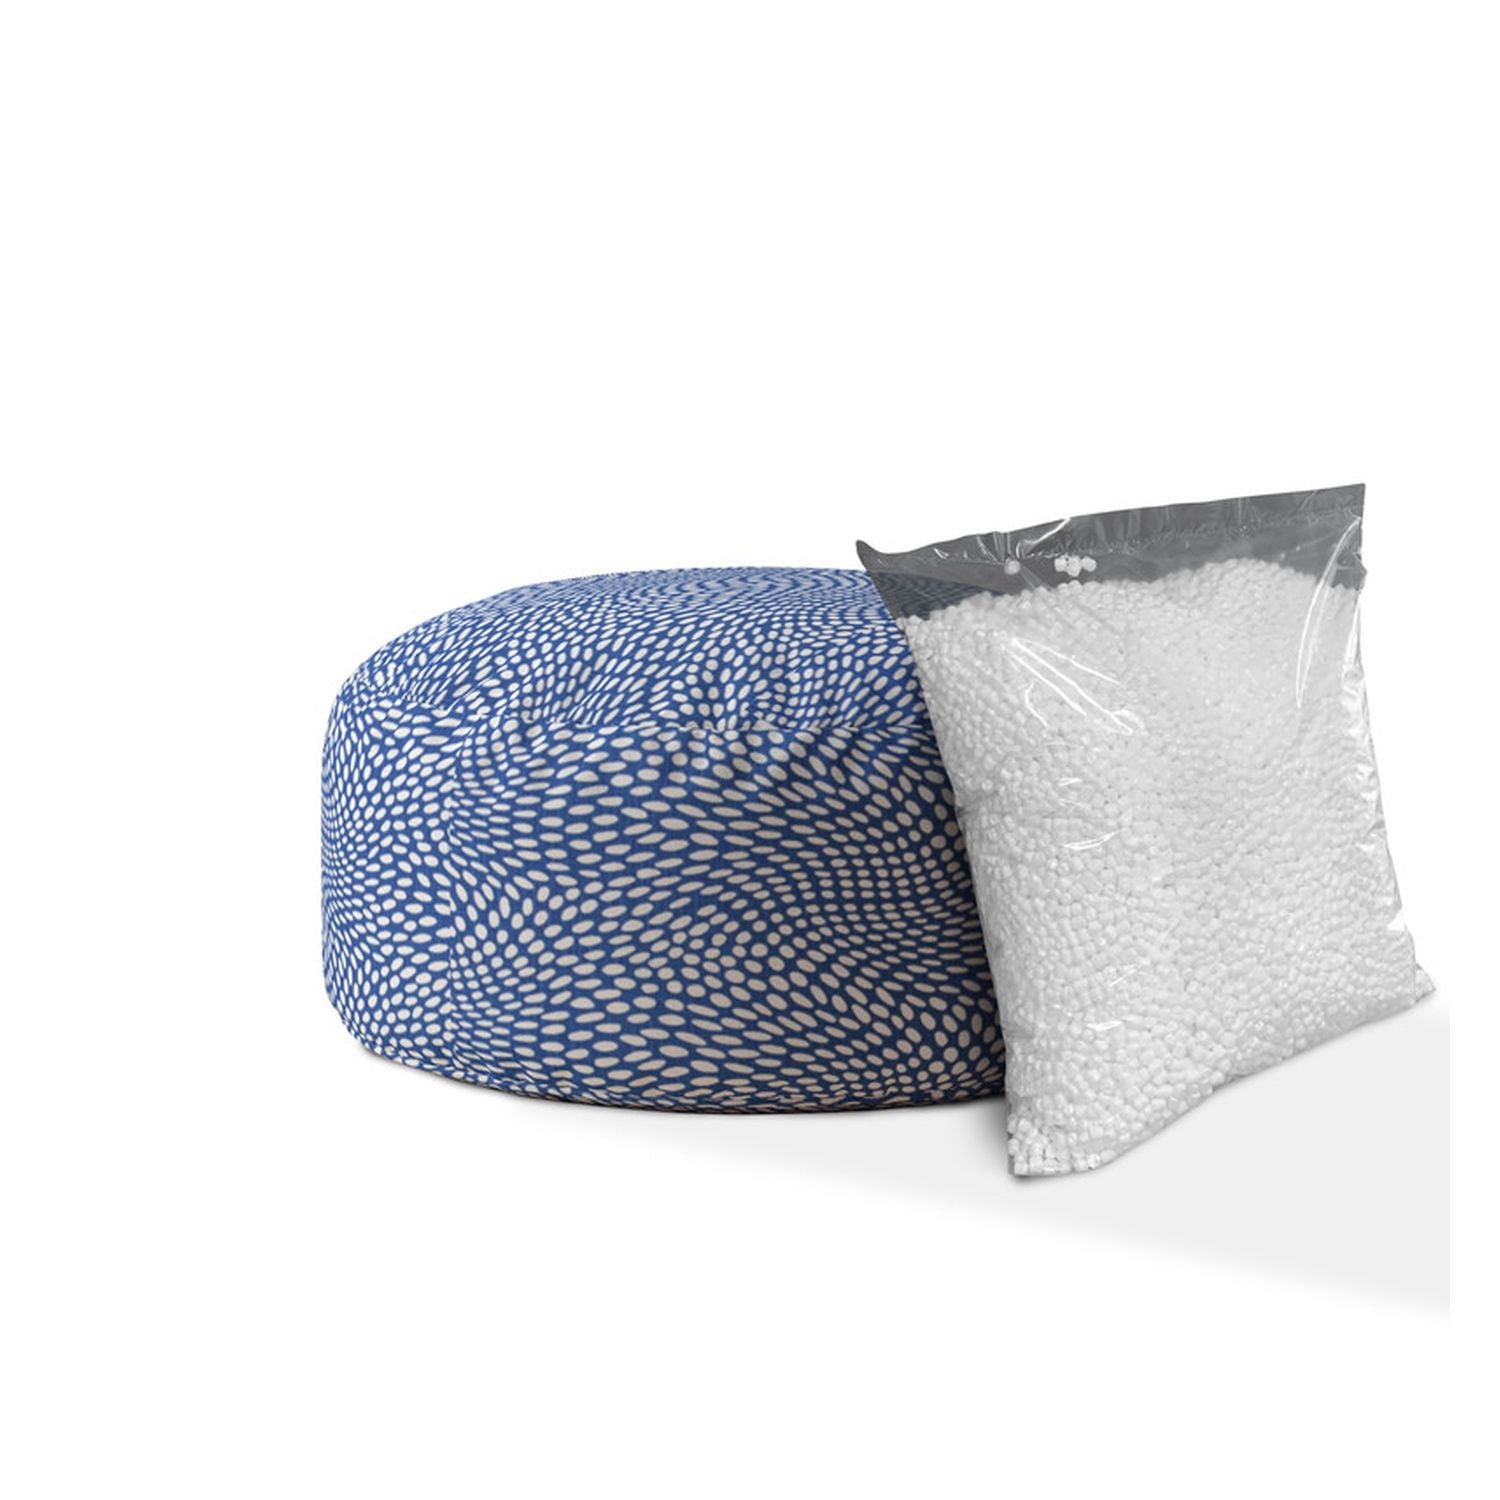 24" Blue And White Canvas Round Polka Dots Pouf Cover